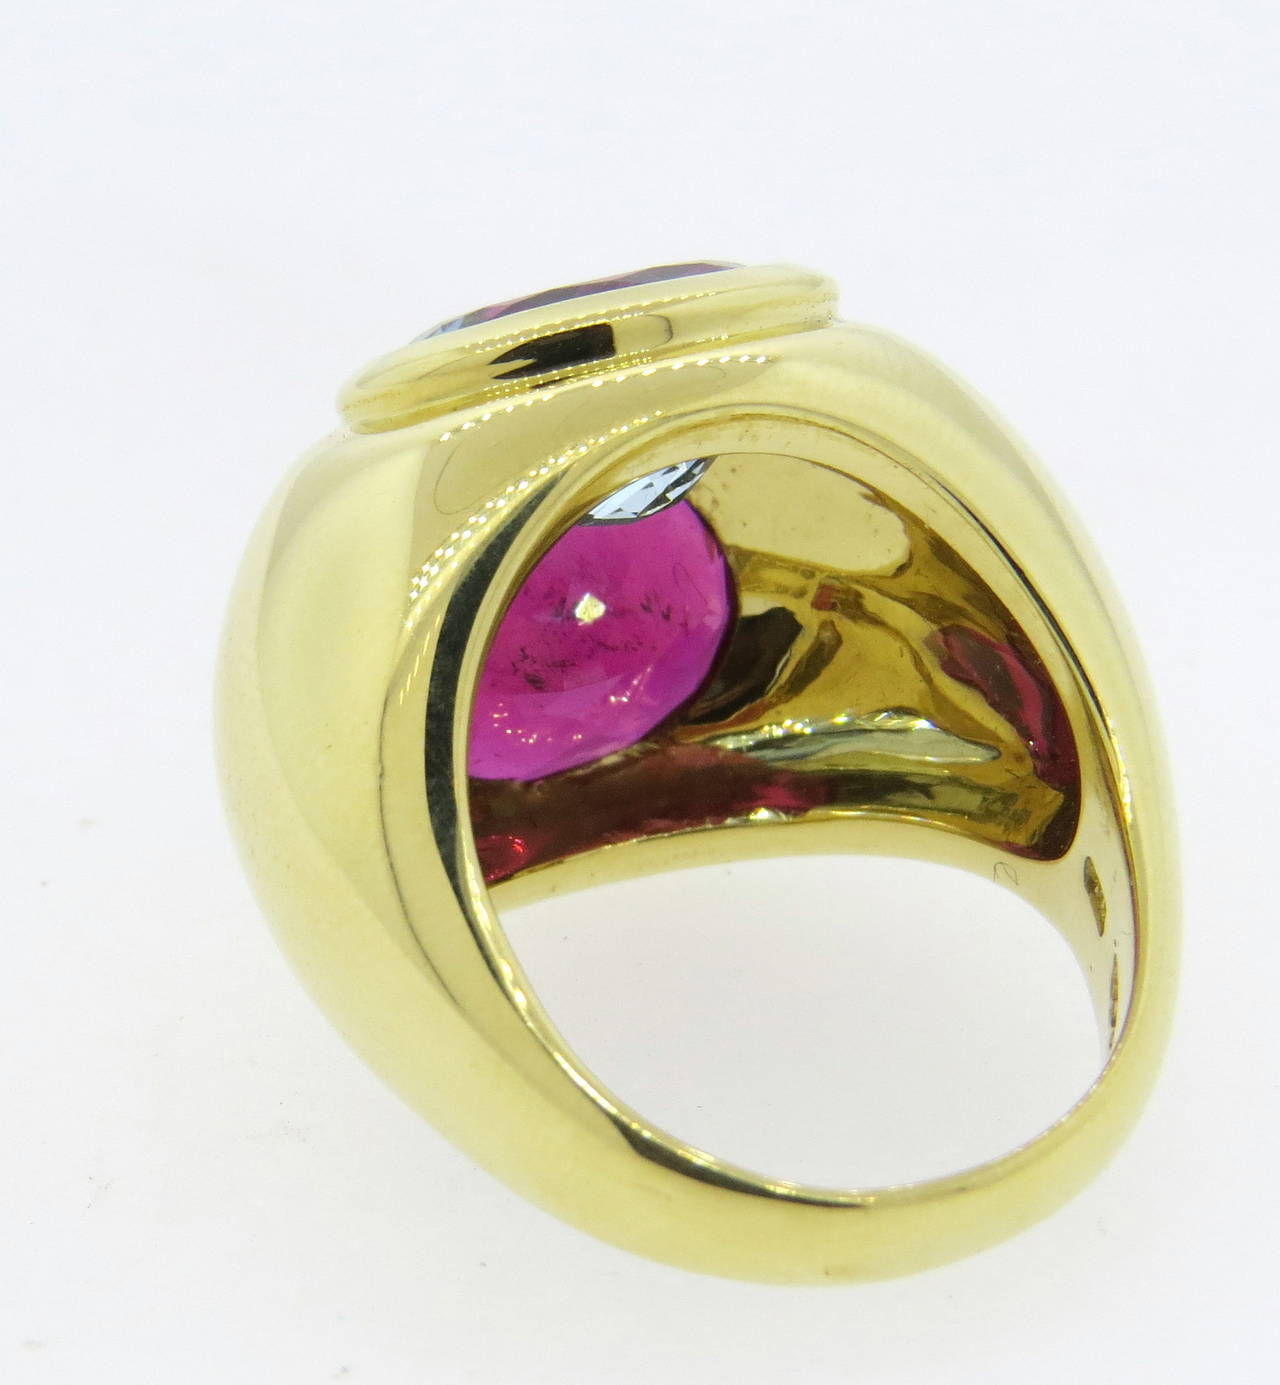 An 18k yellow gold dome ring set with an aquamarine measuring 9.1mm x 11.3mm and a rubellite tourmaline measuring 9.1mm x 11.3mm. The top of the ring measures 21mm in width and sits 9mm from finger. Crafted by Paloma Picasso for Tiffany & Co., the